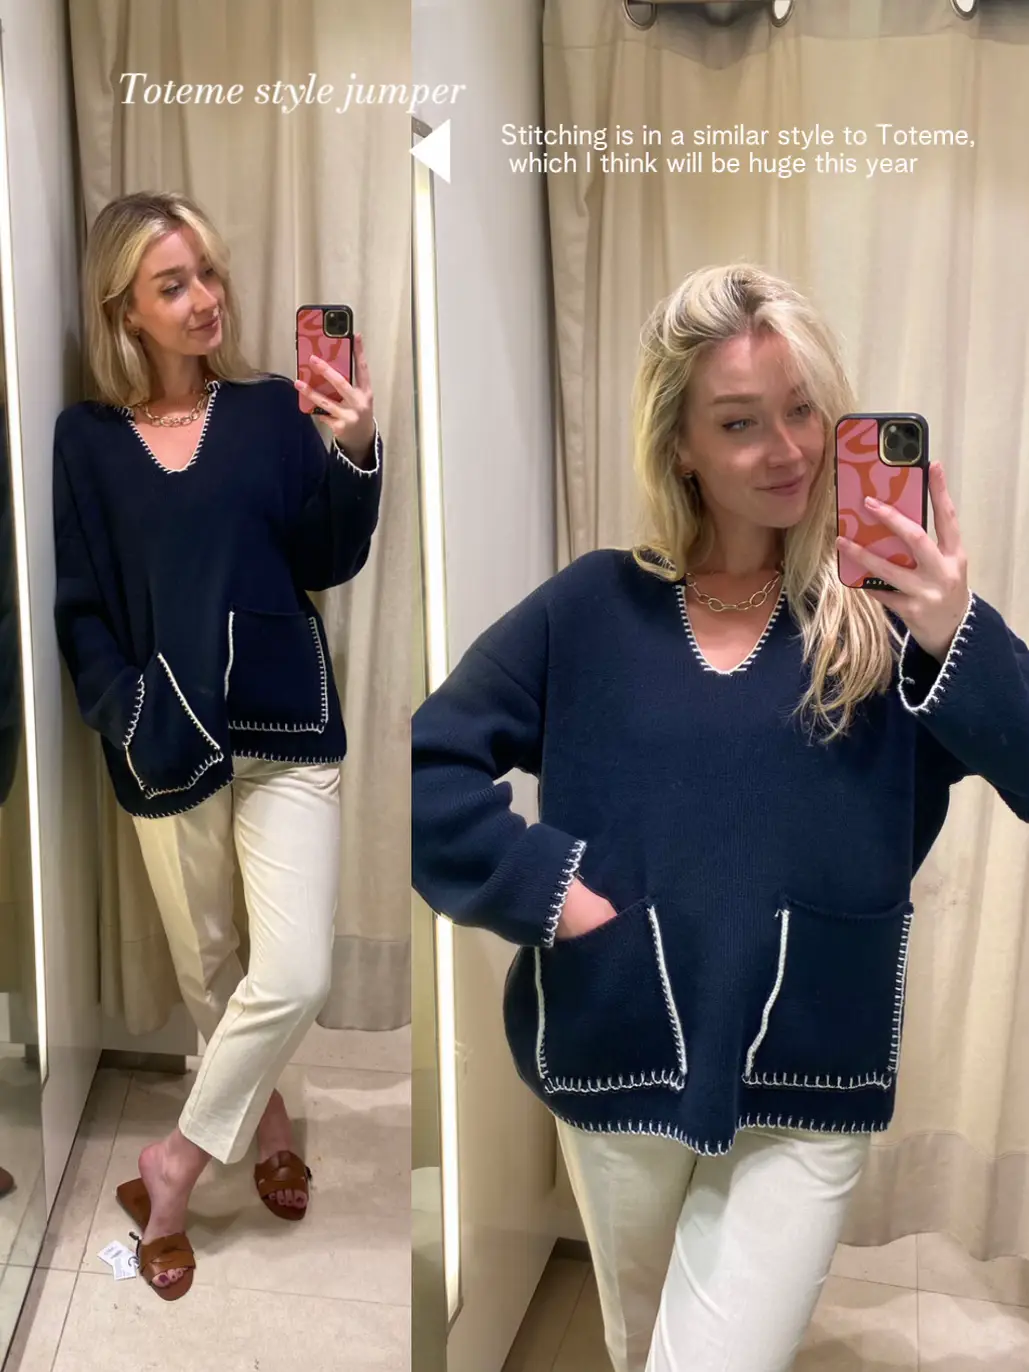 Zara Outfits I bought this week, Gallery posted by tarajade_style